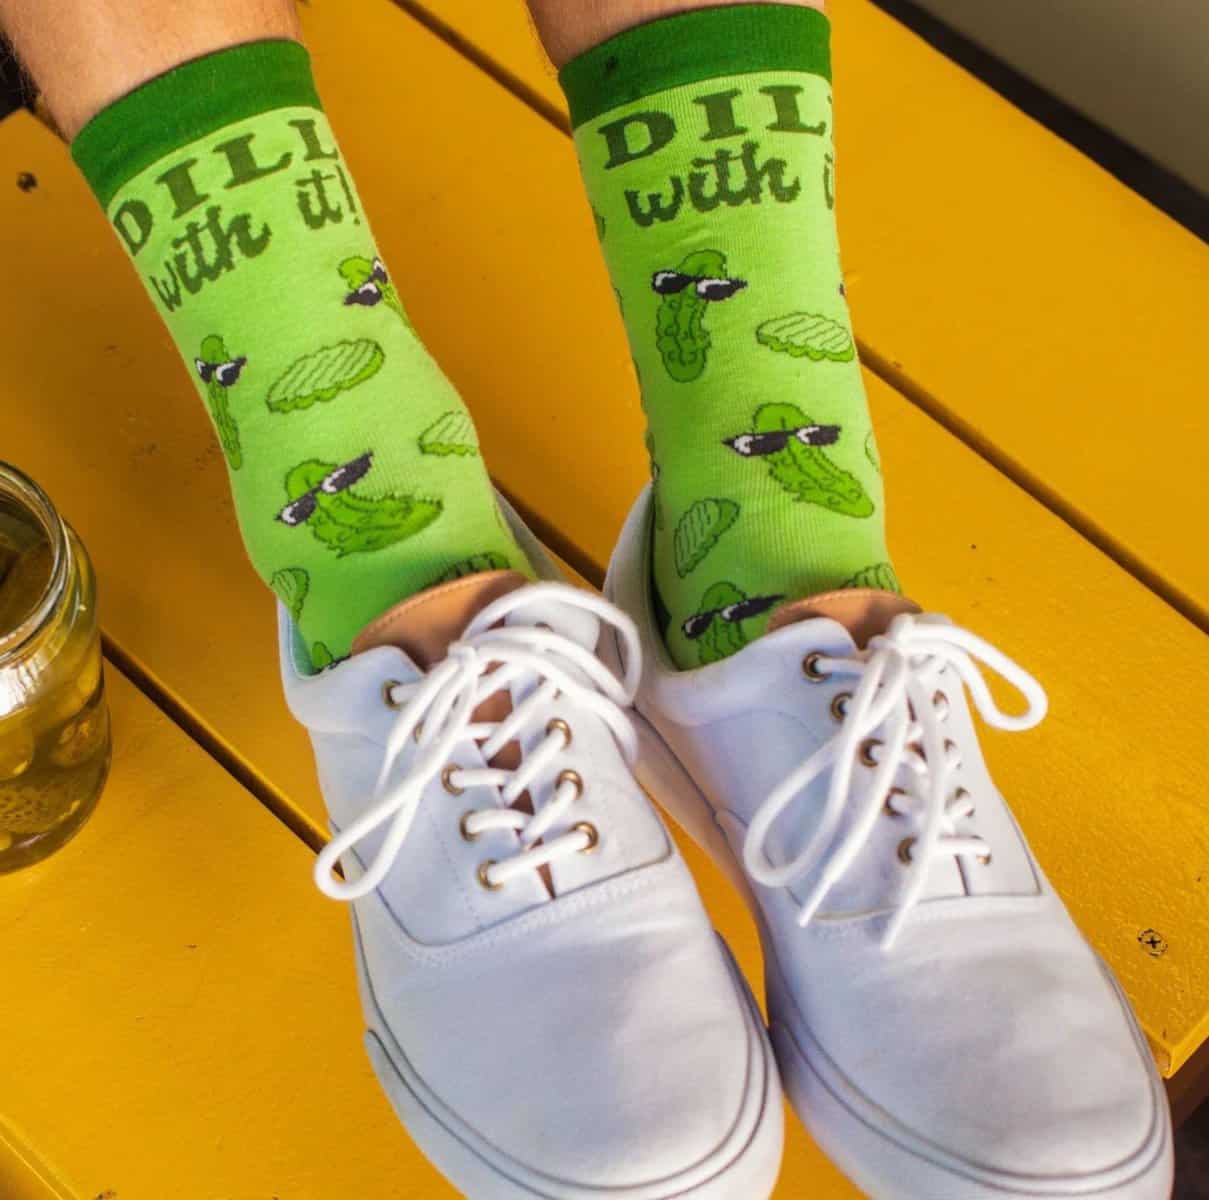 Feet wearing "Dill with it!" green pickle socks with white lace up shoes